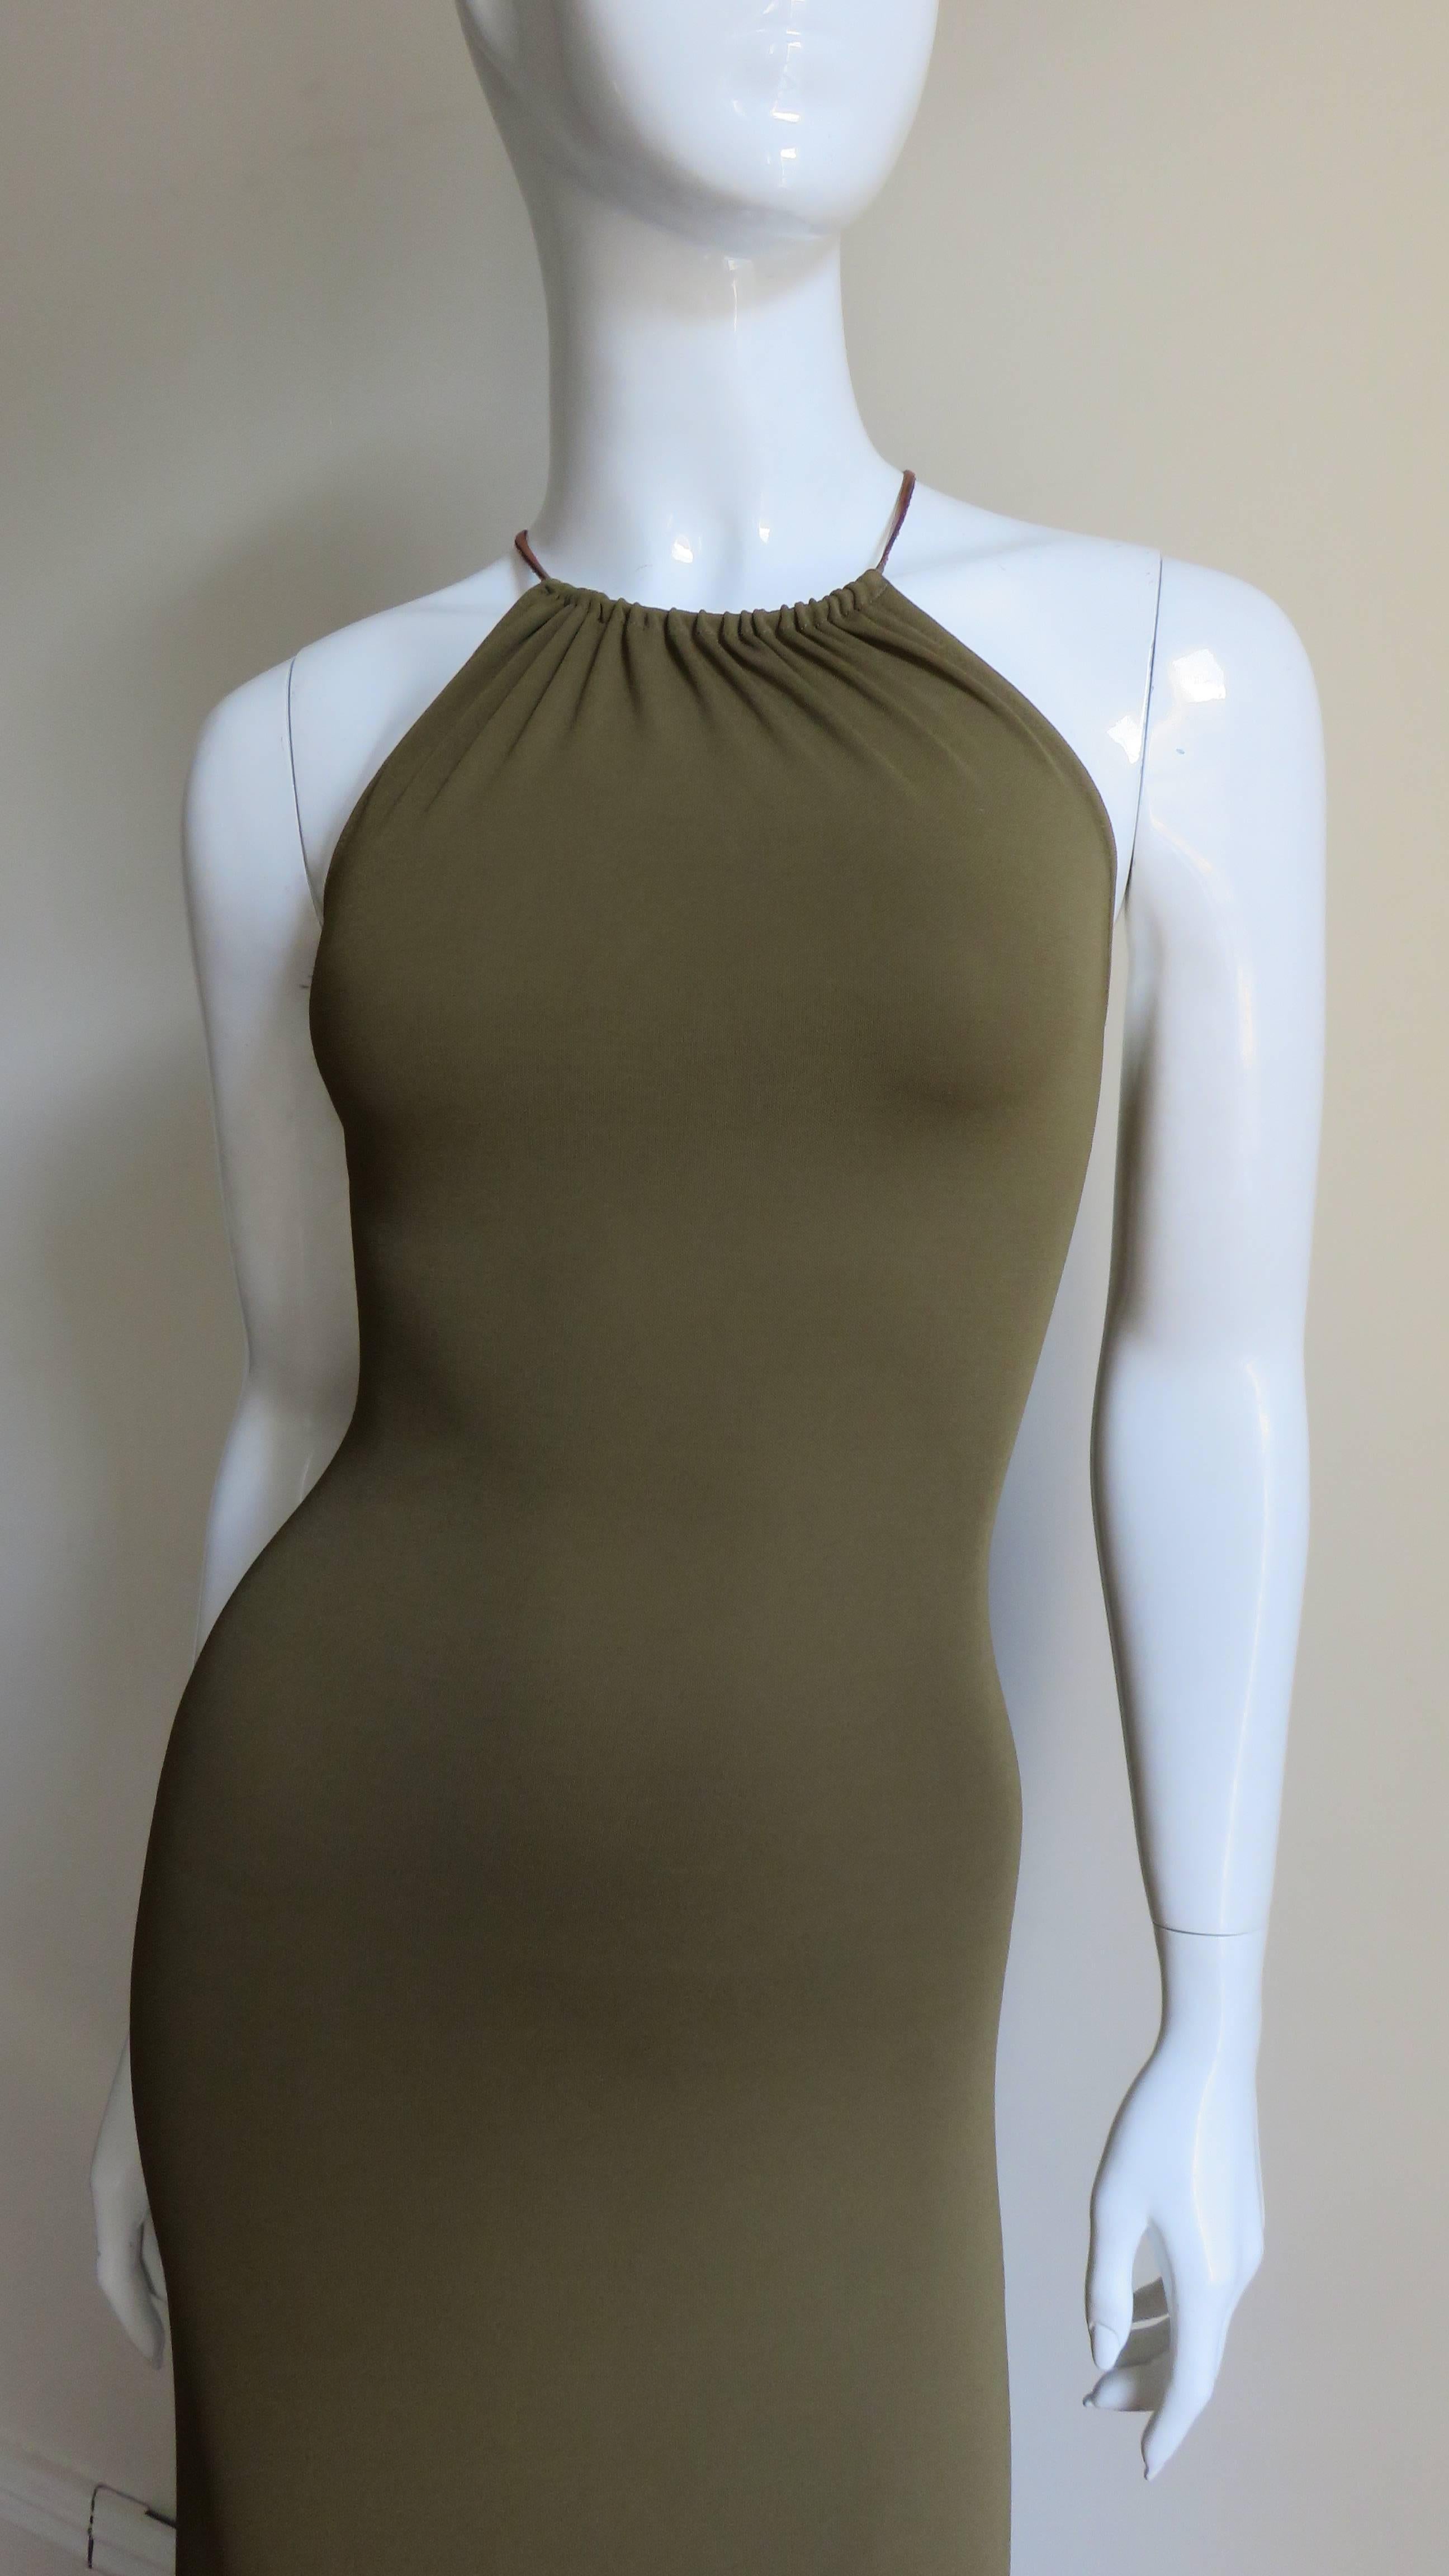 A fabulous dress from Celine in olive jersey.  It is fitted through to the hips and flares slightly toward the midi length hem.  The back is plunging with leather laces criss crossing the back.  It is unlined, slips on over the head and laces have